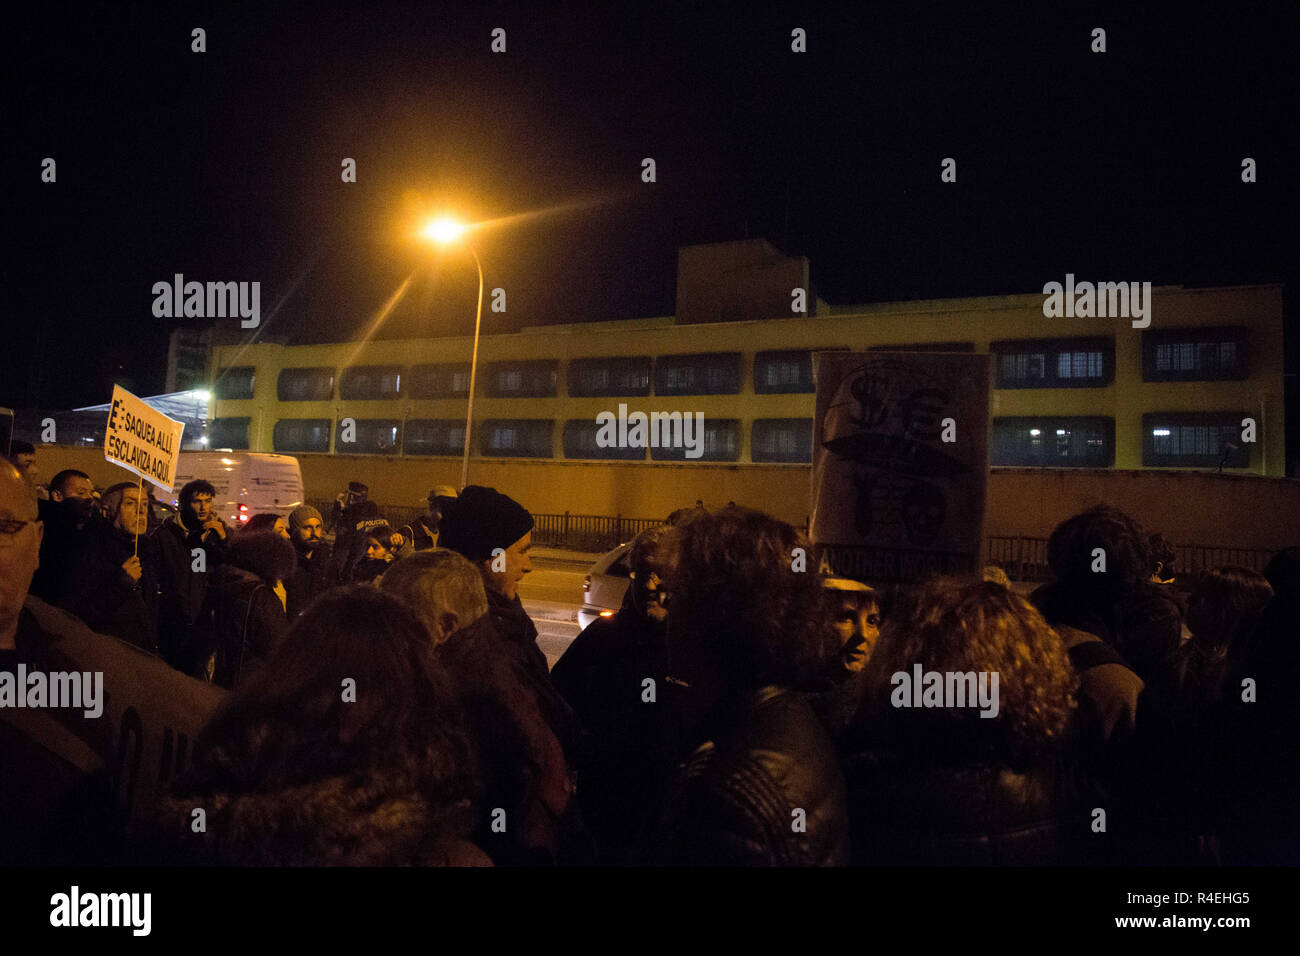 Madrid, Spain. 27th Nov, 2018. Hundreds of protesters are seen gathered in front of the Aluche Immigrant Detention Centre during the protest.Demonstration was held in front of the Immigration Detention Centre to demand for the closure of this centre and the rest in Europe for treating undocumented immigrants as criminals, depriving them of freedom, against Human Rights and for the racist treatment in them. Credit: Lito Lizana/SOPA Images/ZUMA Wire/Alamy Live News Stock Photo